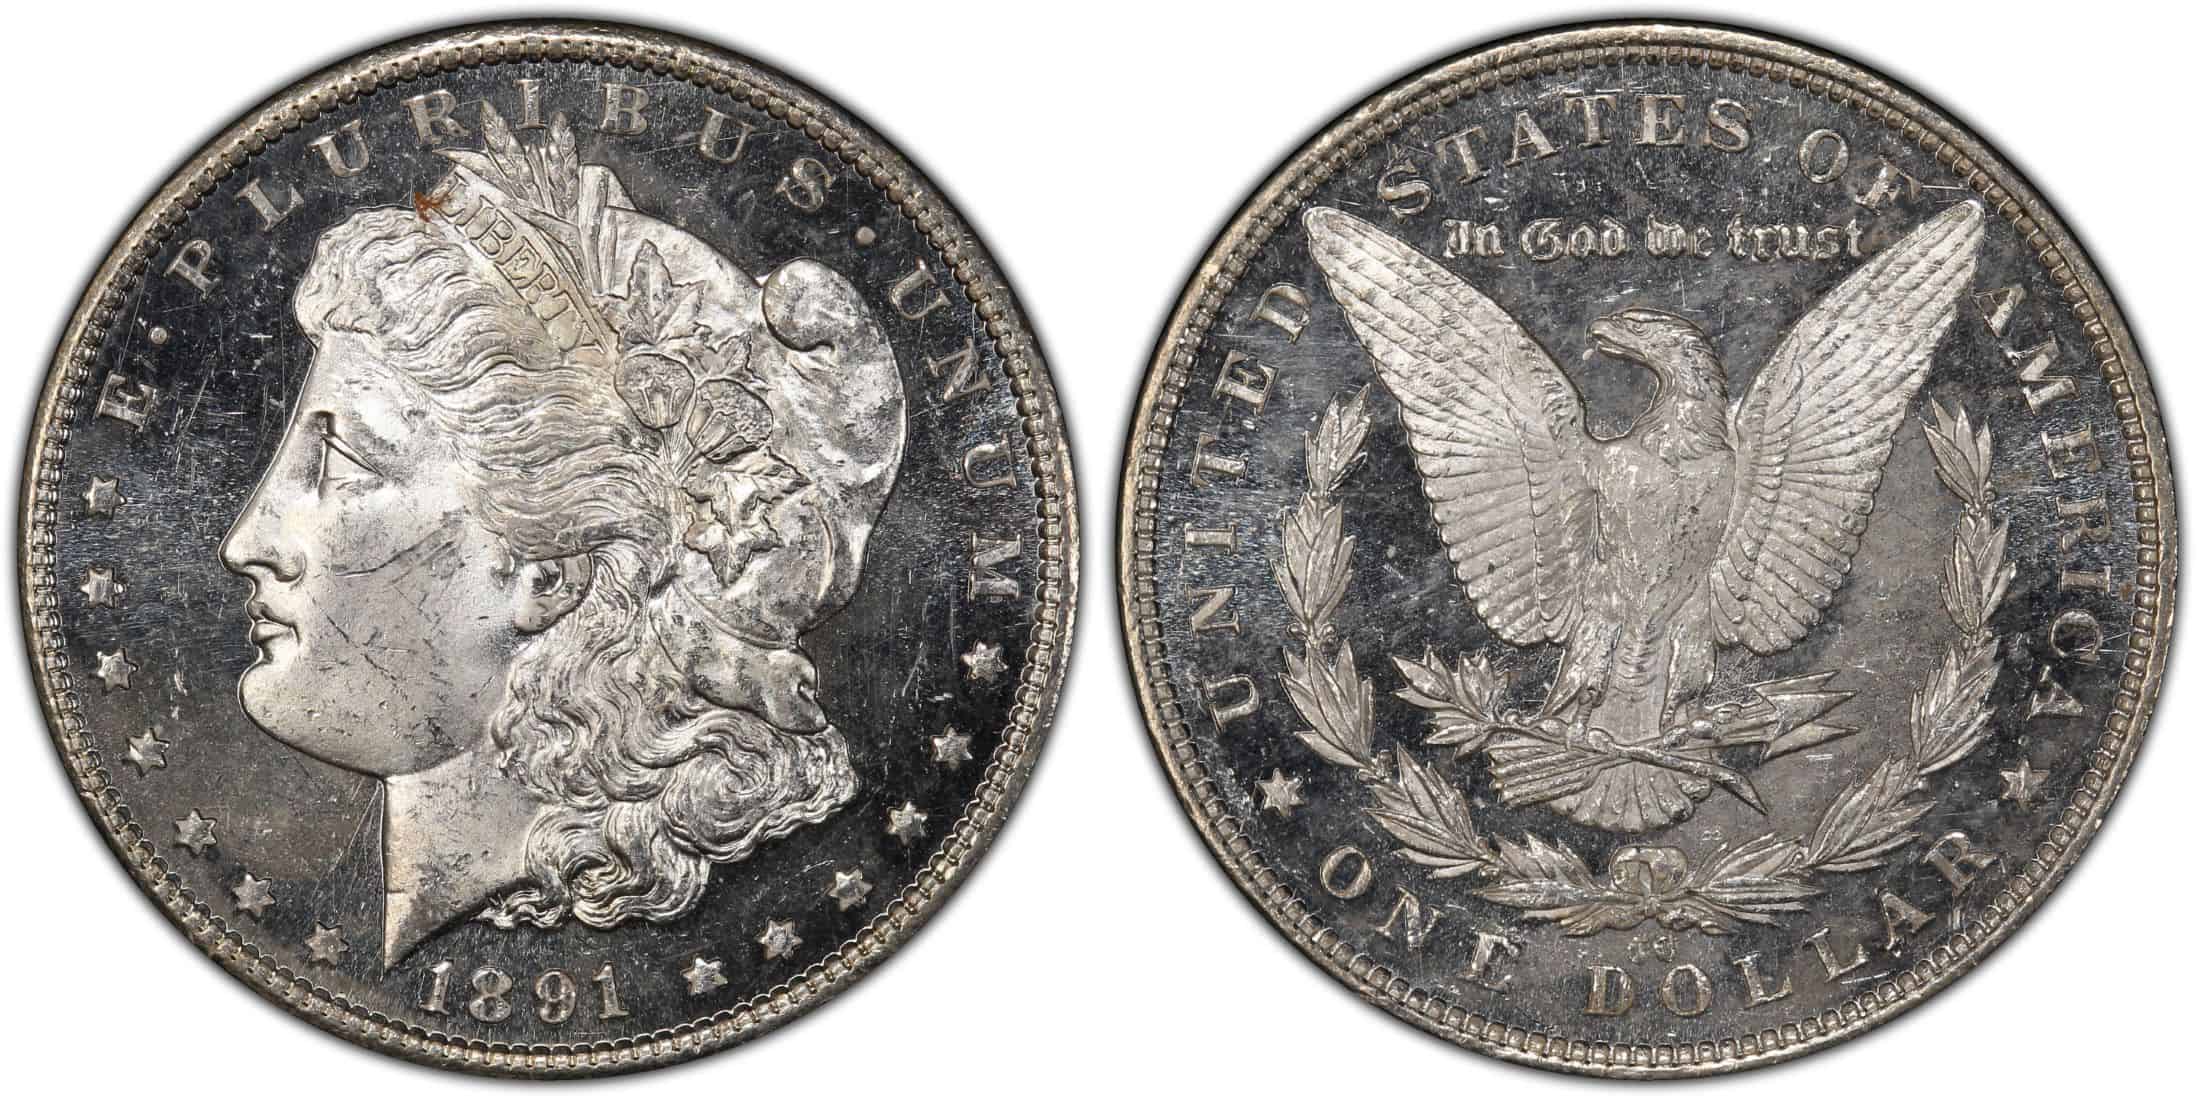 1891 Silver Coin with Spitting Eagle Error